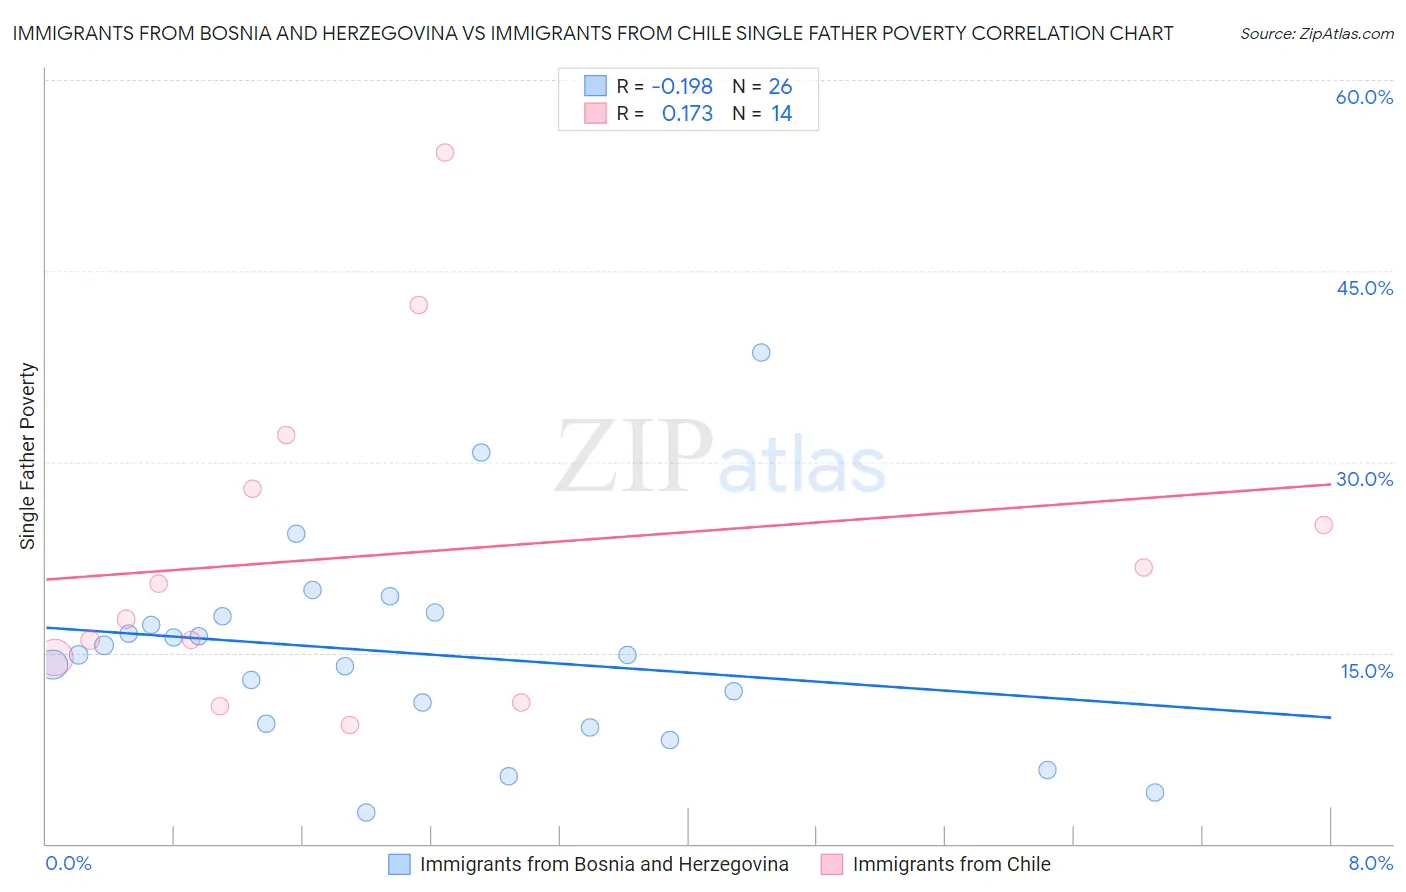 Immigrants from Bosnia and Herzegovina vs Immigrants from Chile Single Father Poverty